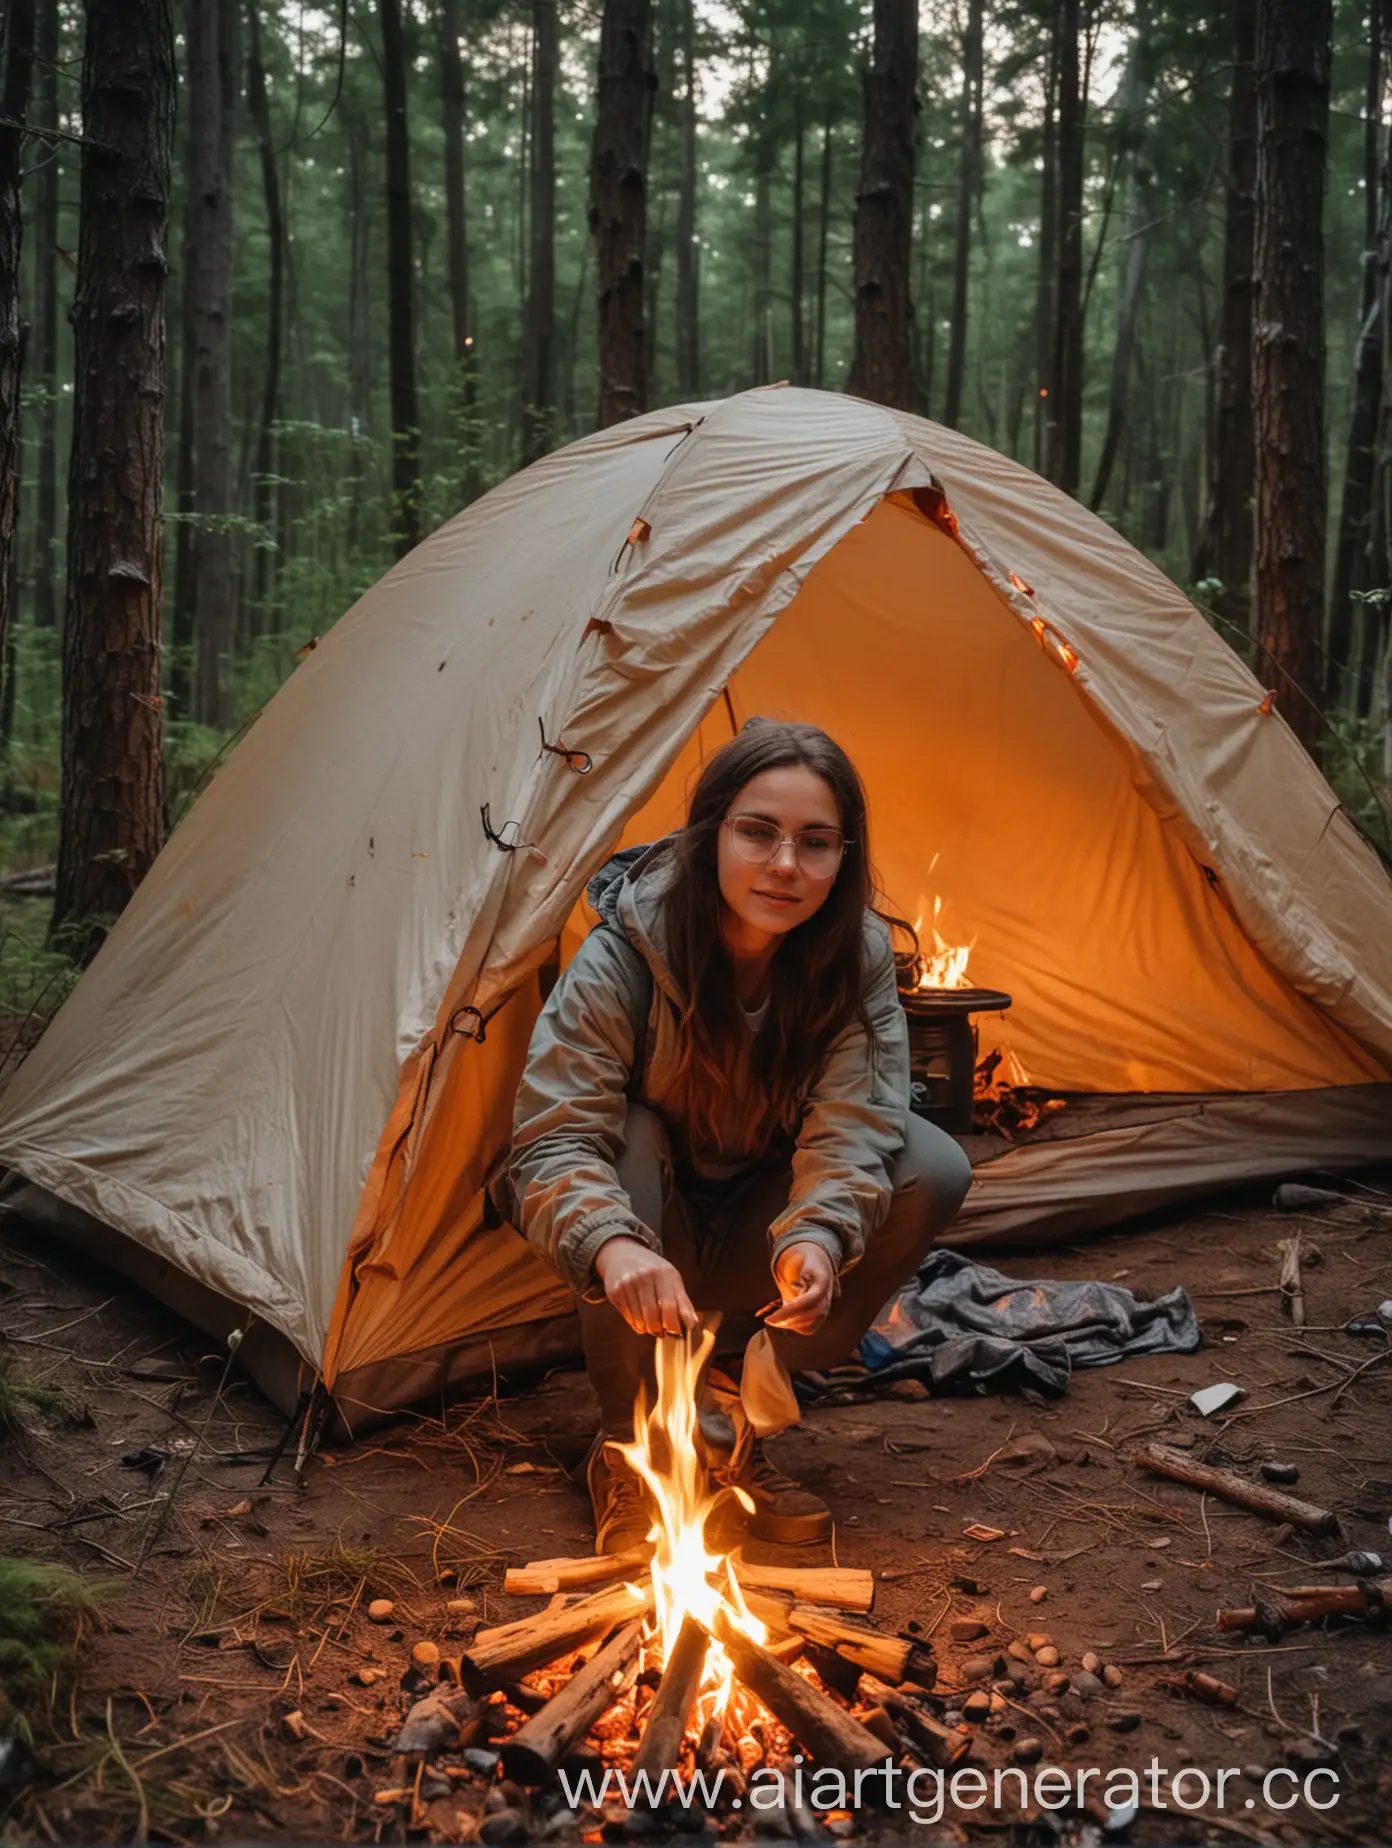 Girl-Hiking-with-Tent-and-Campfire-at-Dusk-to-Repel-Mosquitoes